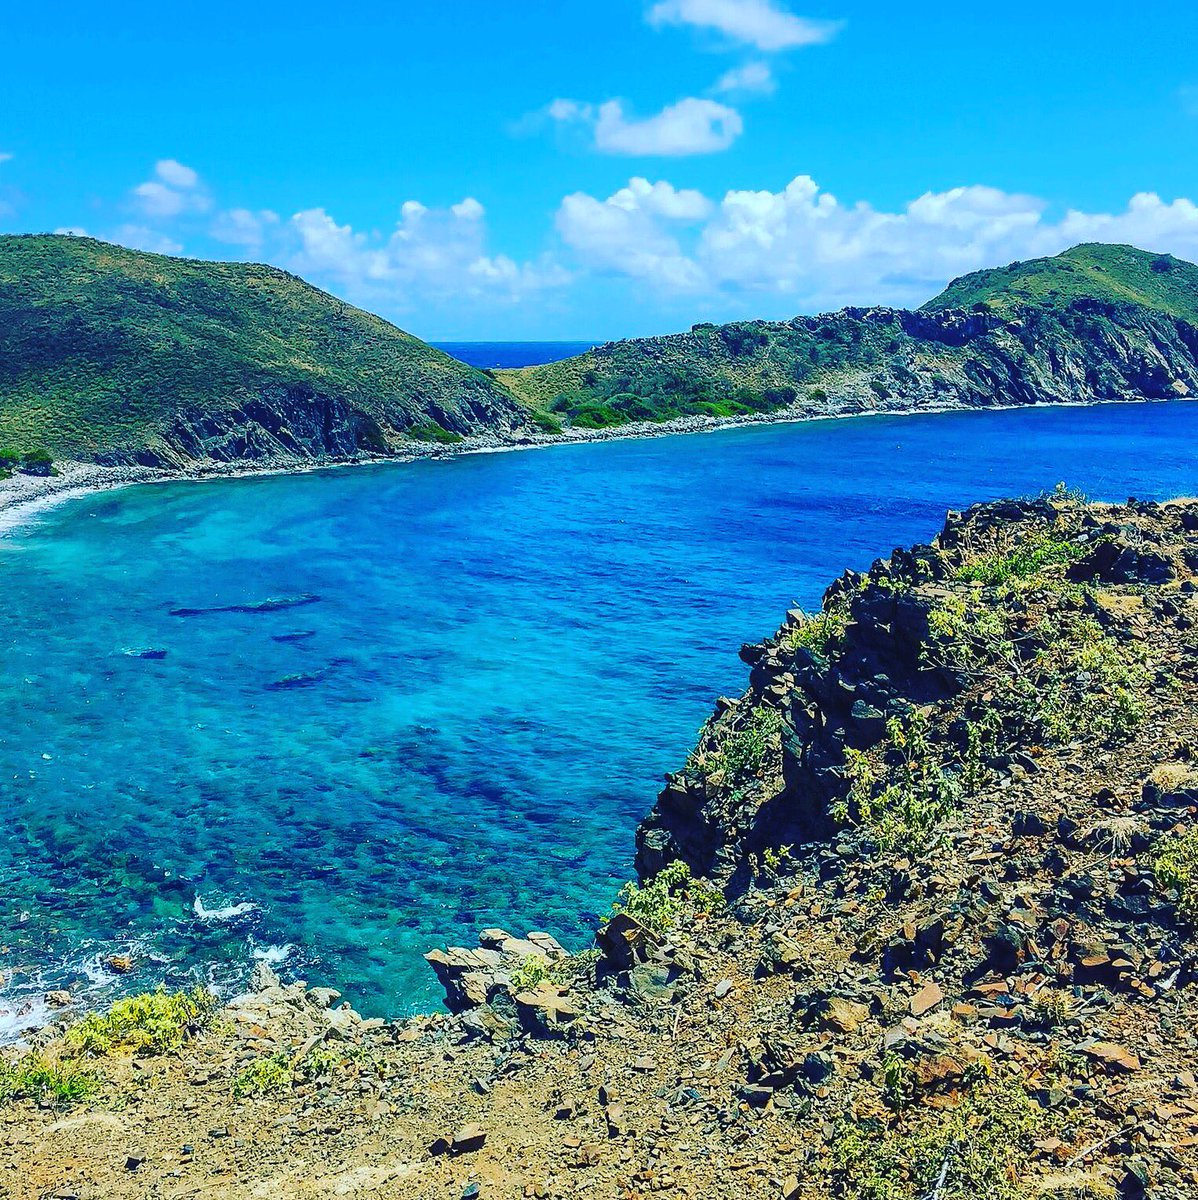 What a lovely day at Salt Island! #Travel #vacation #BVI @BritishVirginIs